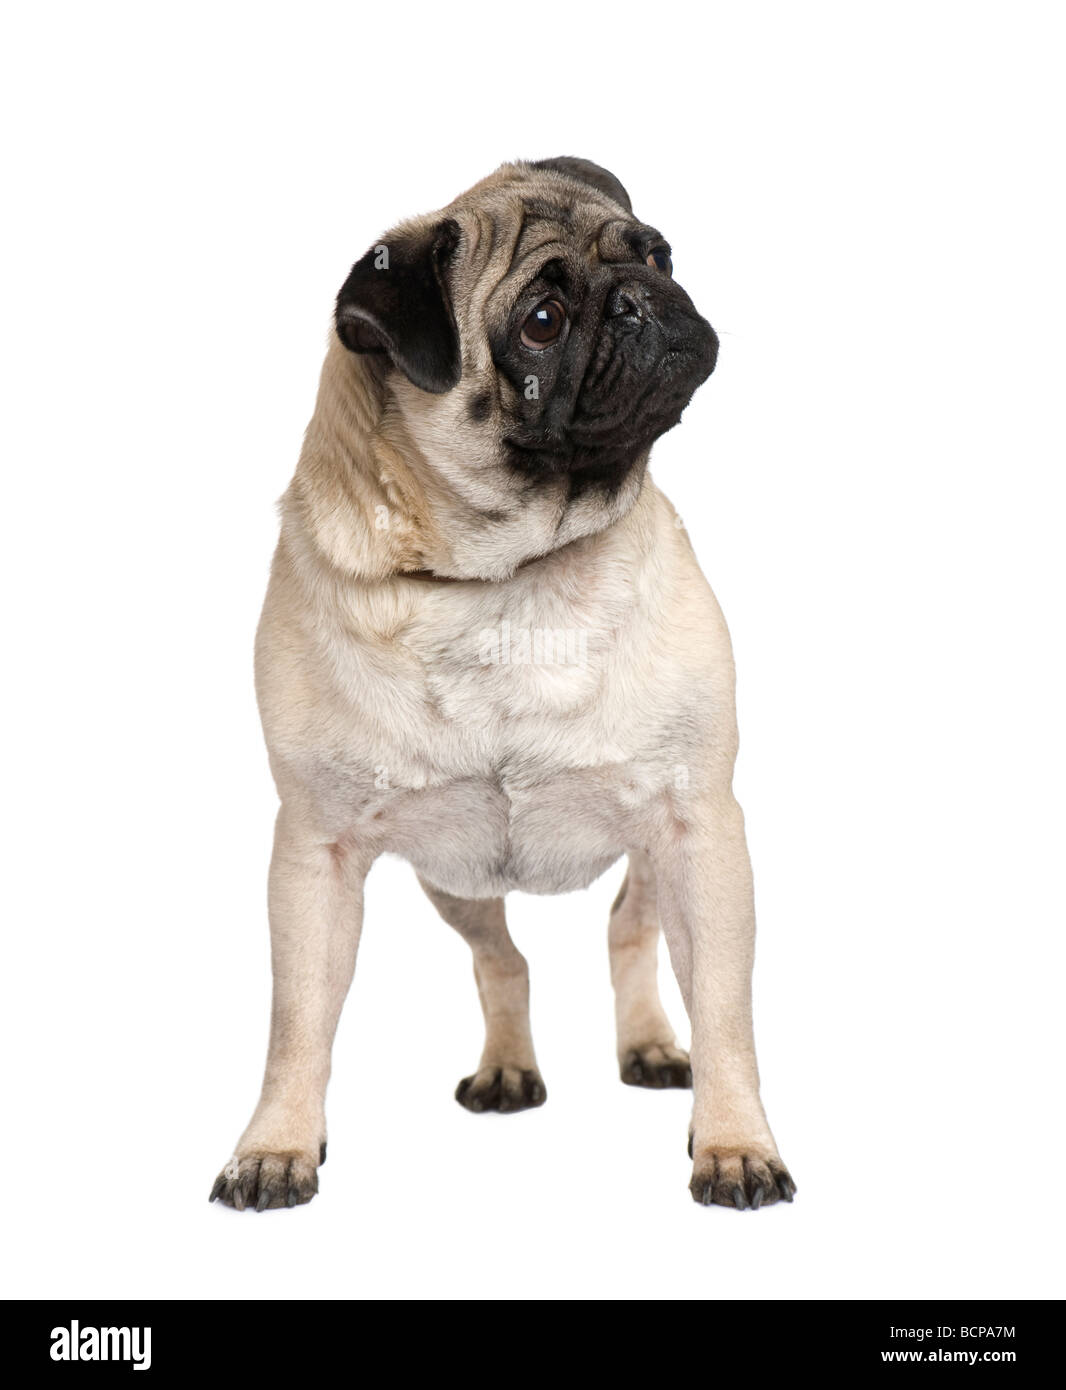 Pug in front of white background, studio shot Stock Photo